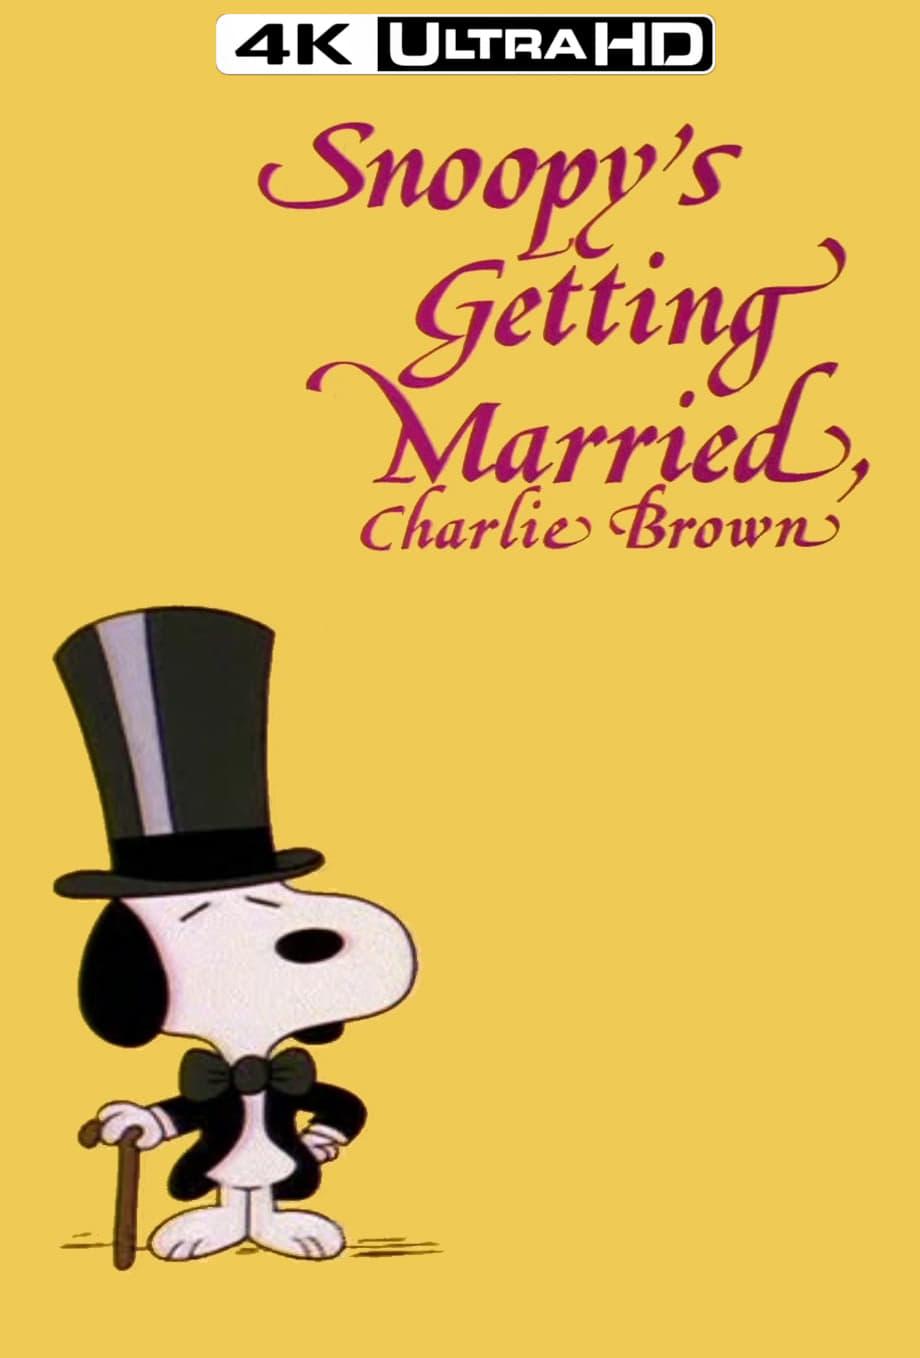 Snoopy's Getting Married, Charlie Brown poster